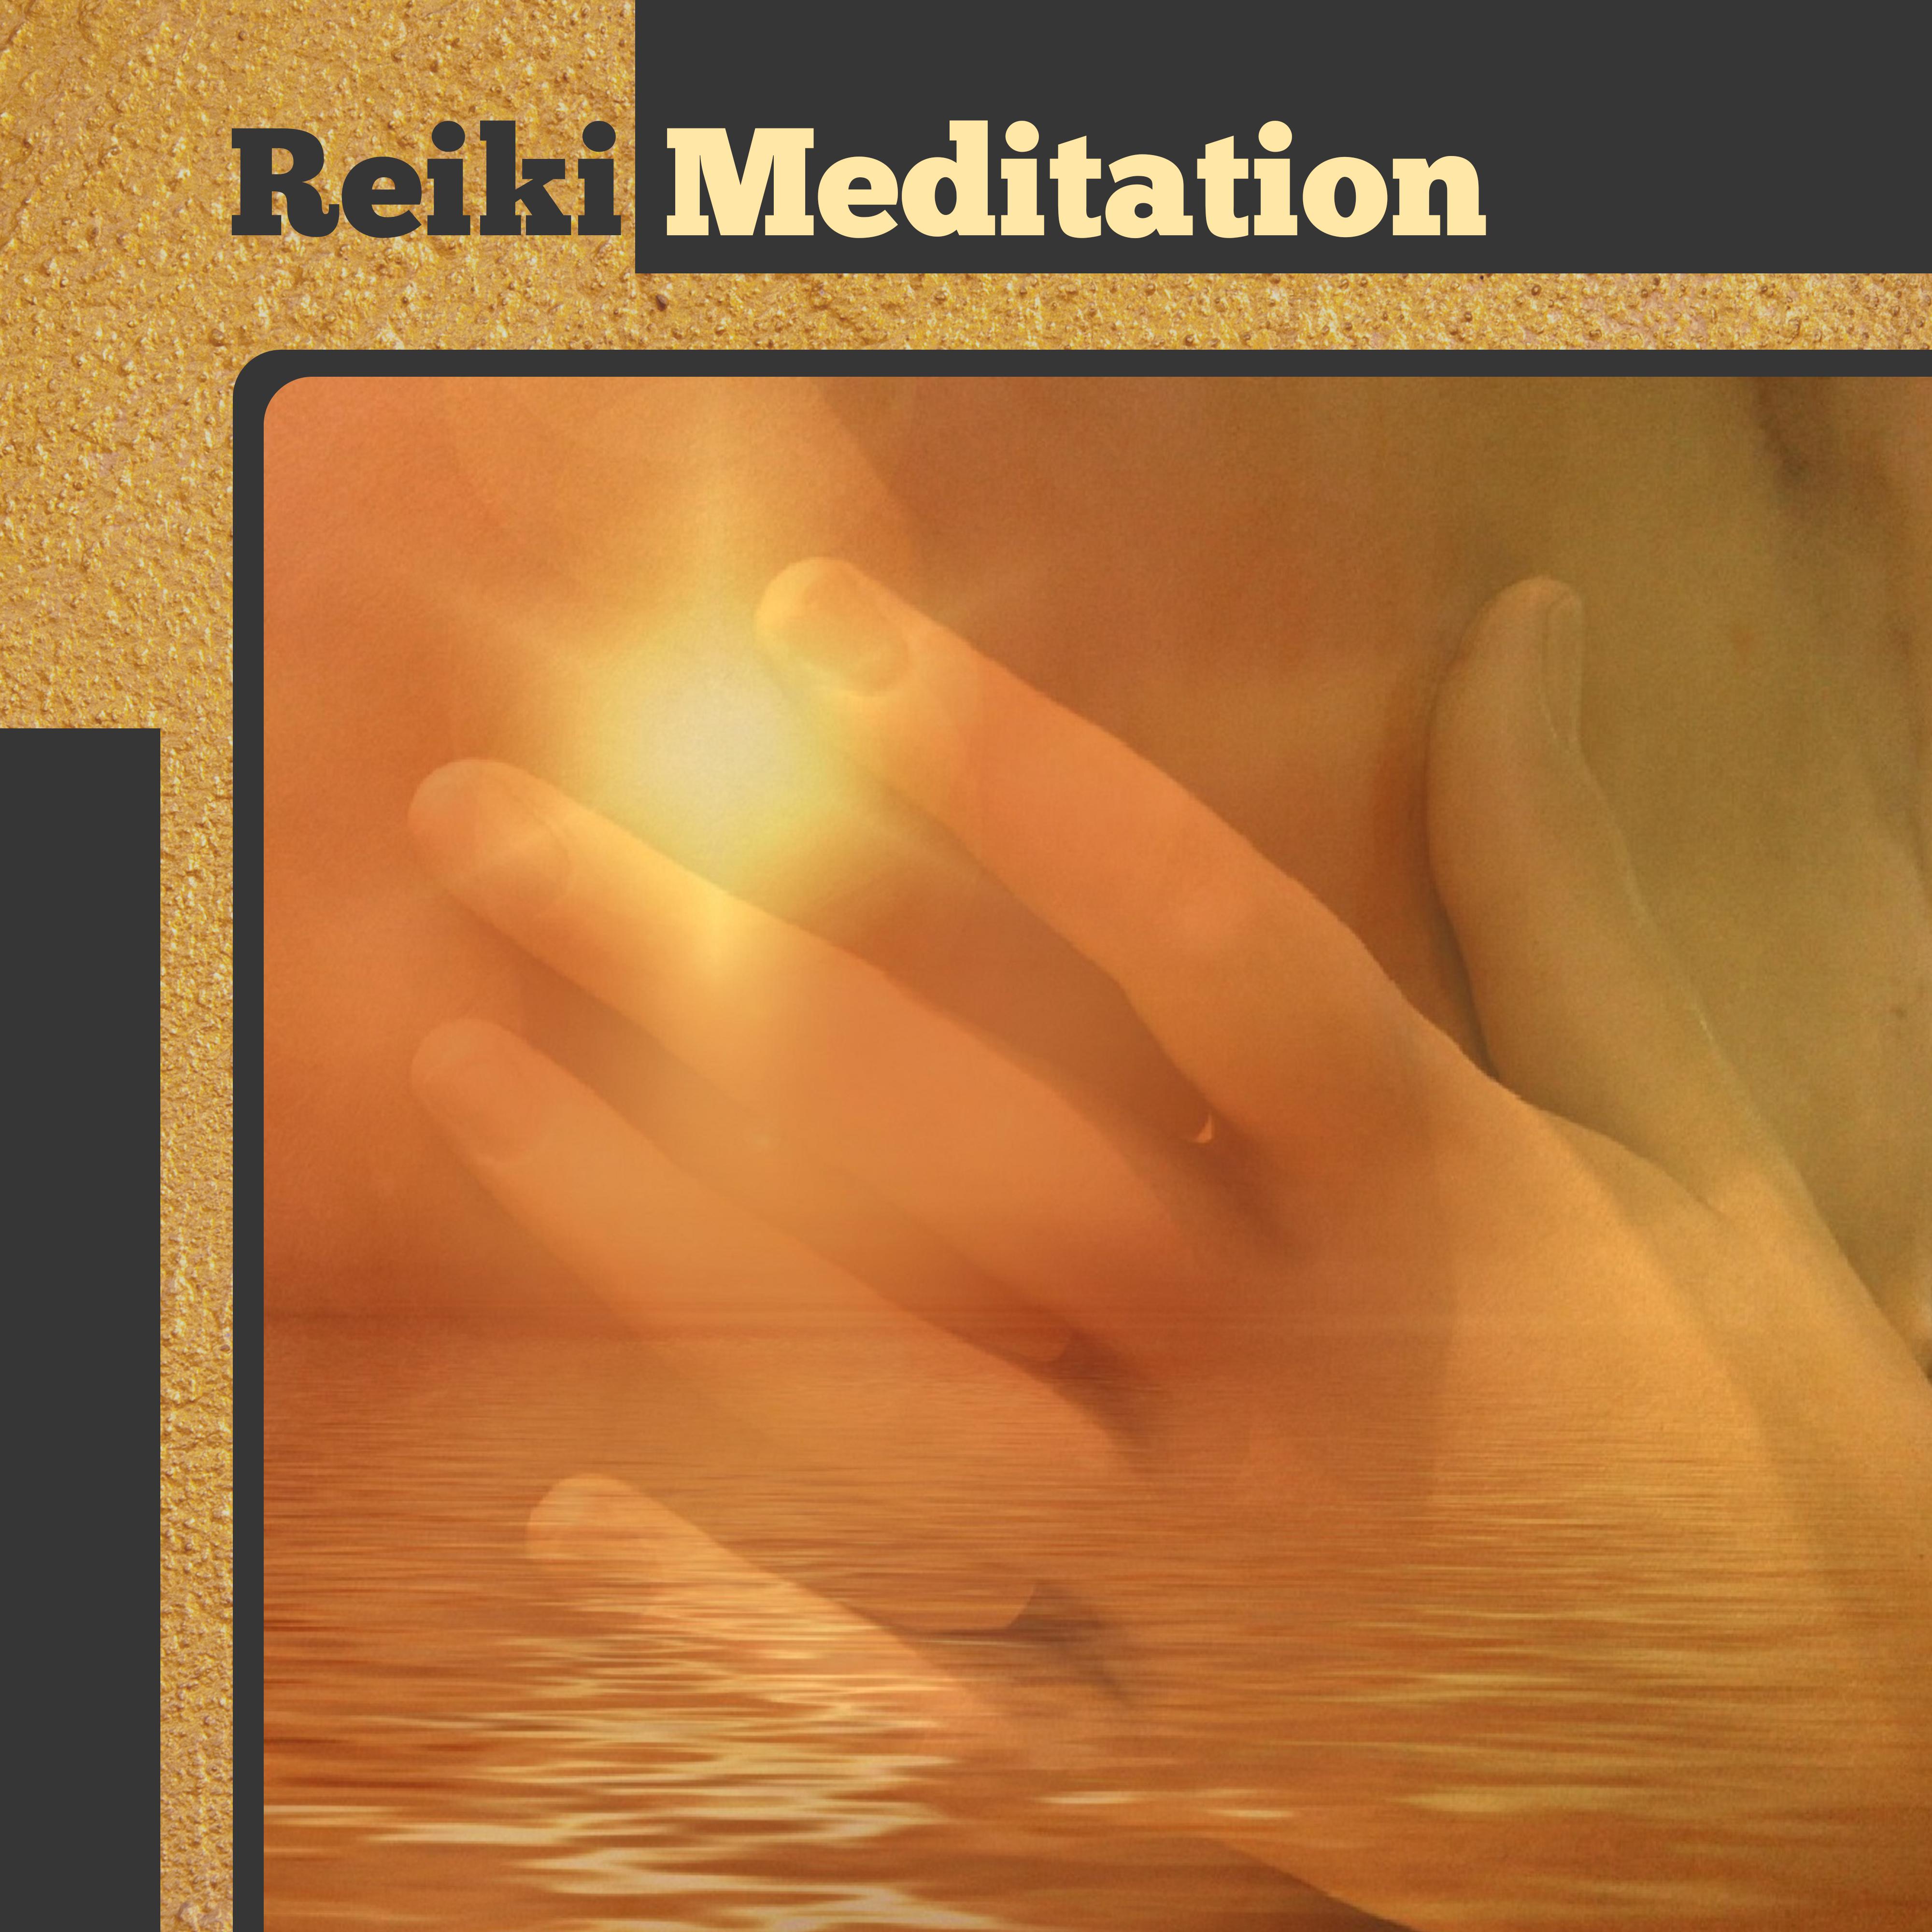 Reiki Meditation – New Age Music for Background to Meditate, Yoga Music, Be Mindful